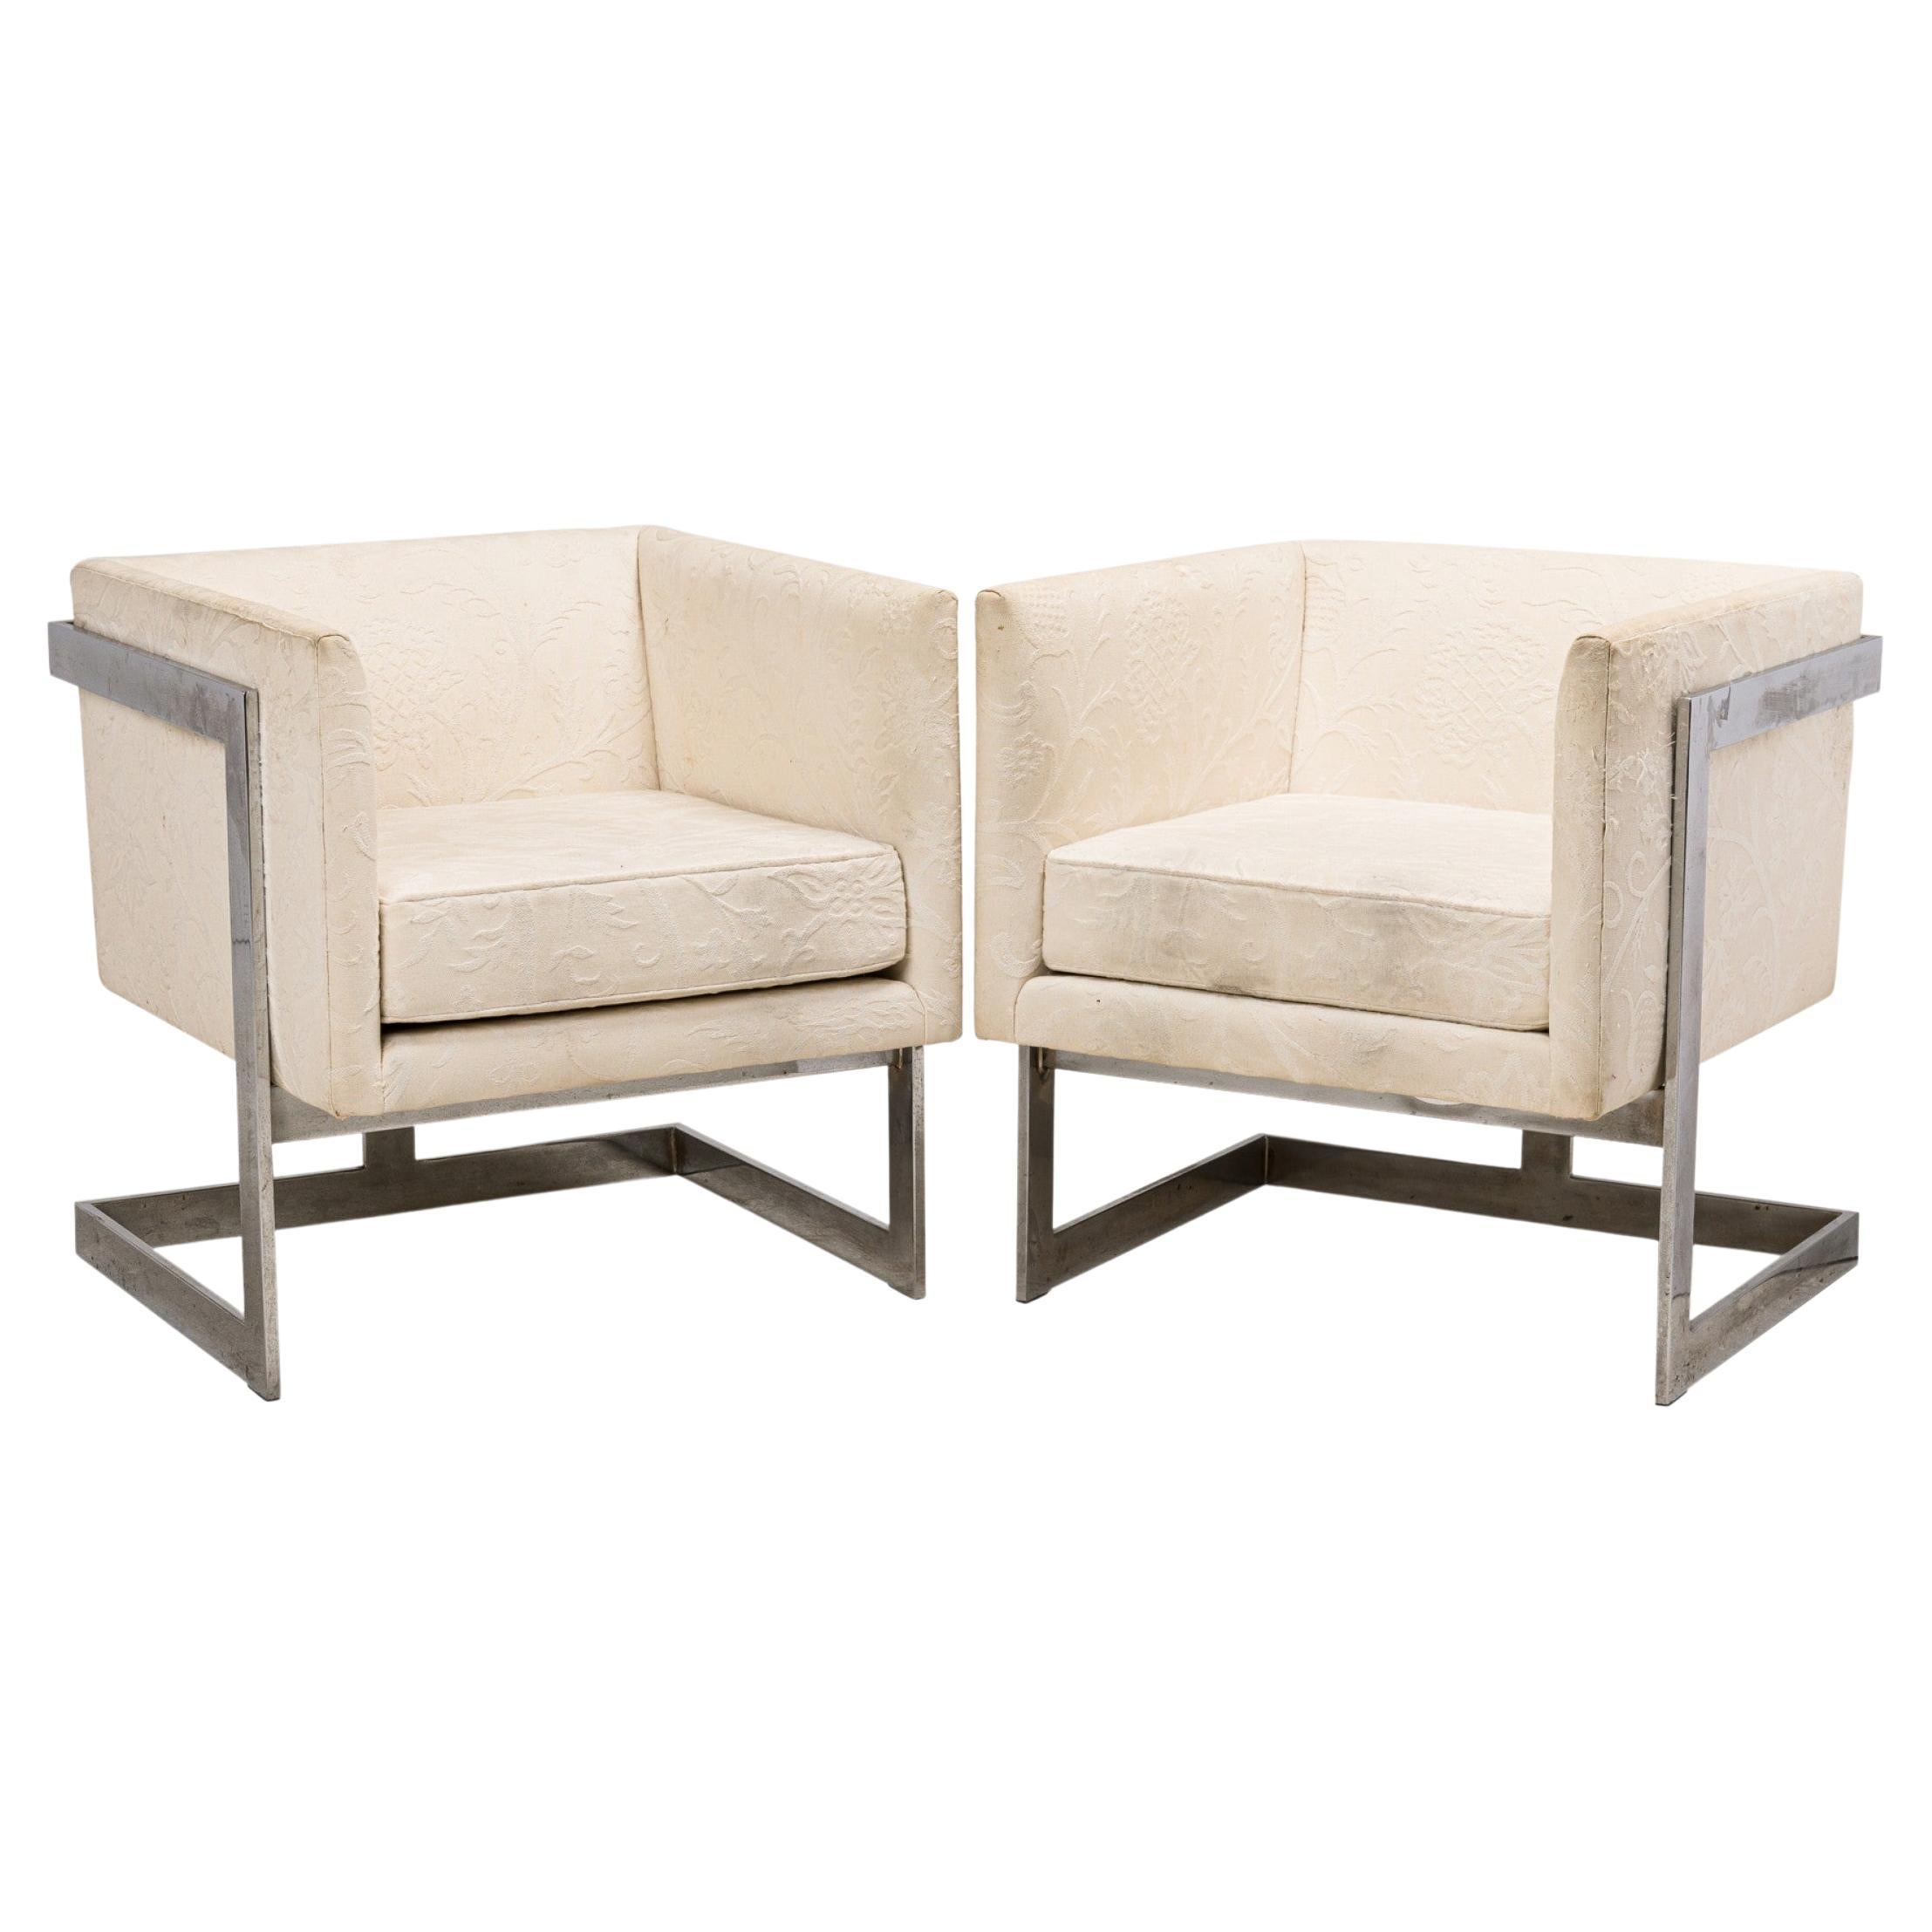 Pair of Milo Baughman Floating Cube Chrome and Beige Upholstery Armchairs For Sale